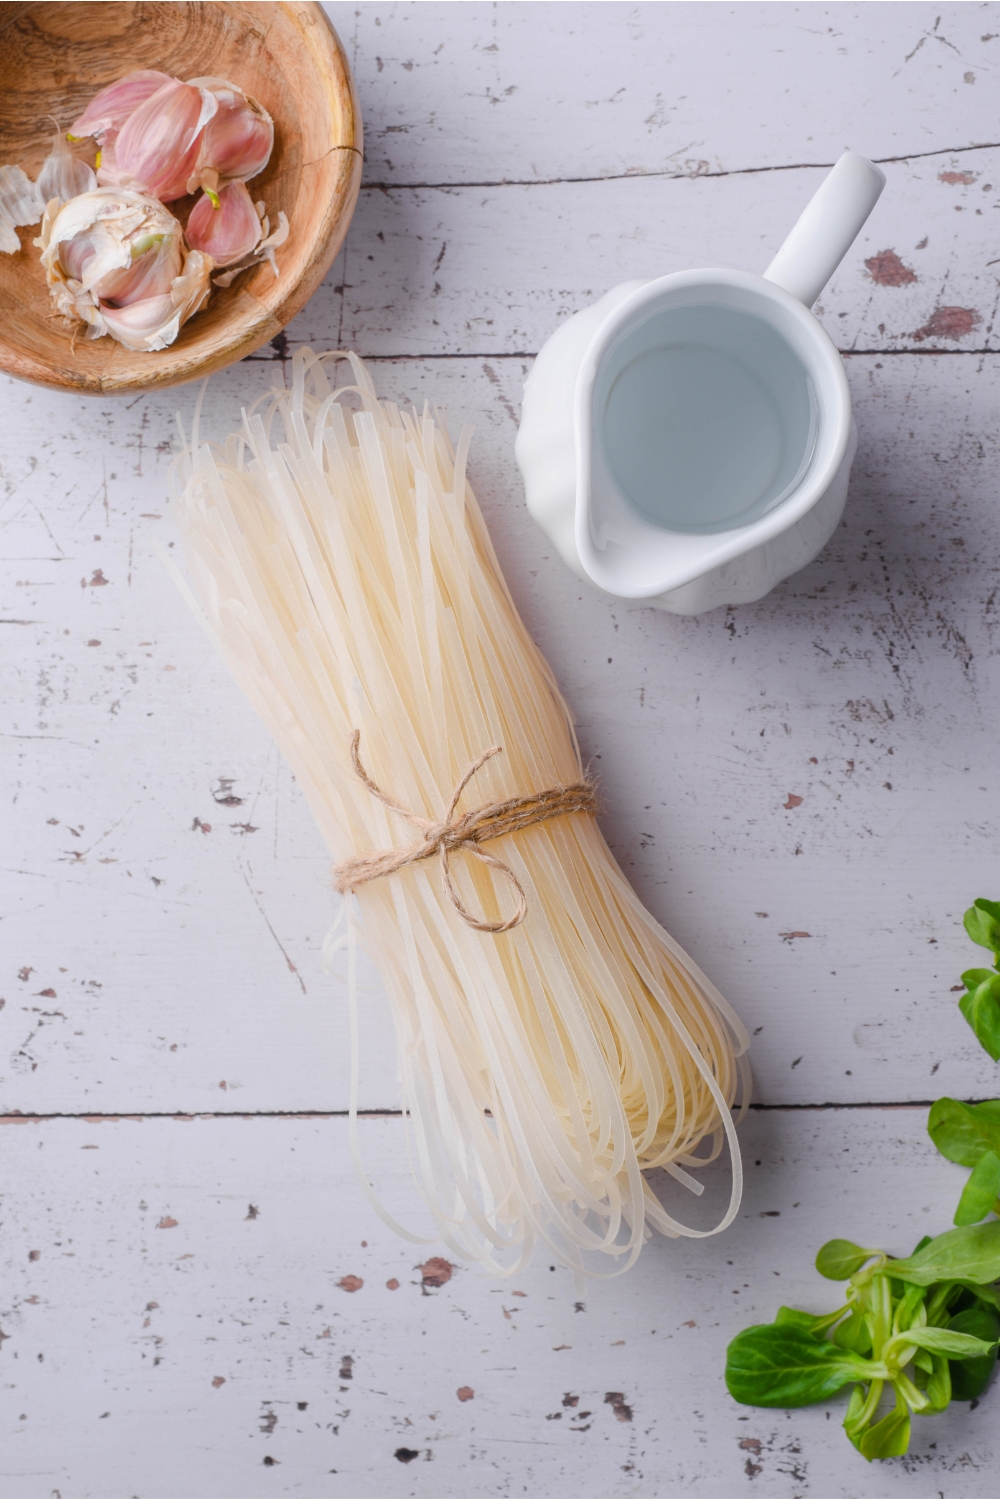 A bunch of dried rice noodles tied together by twine next to a pitcher of water and a bowl of garlic.